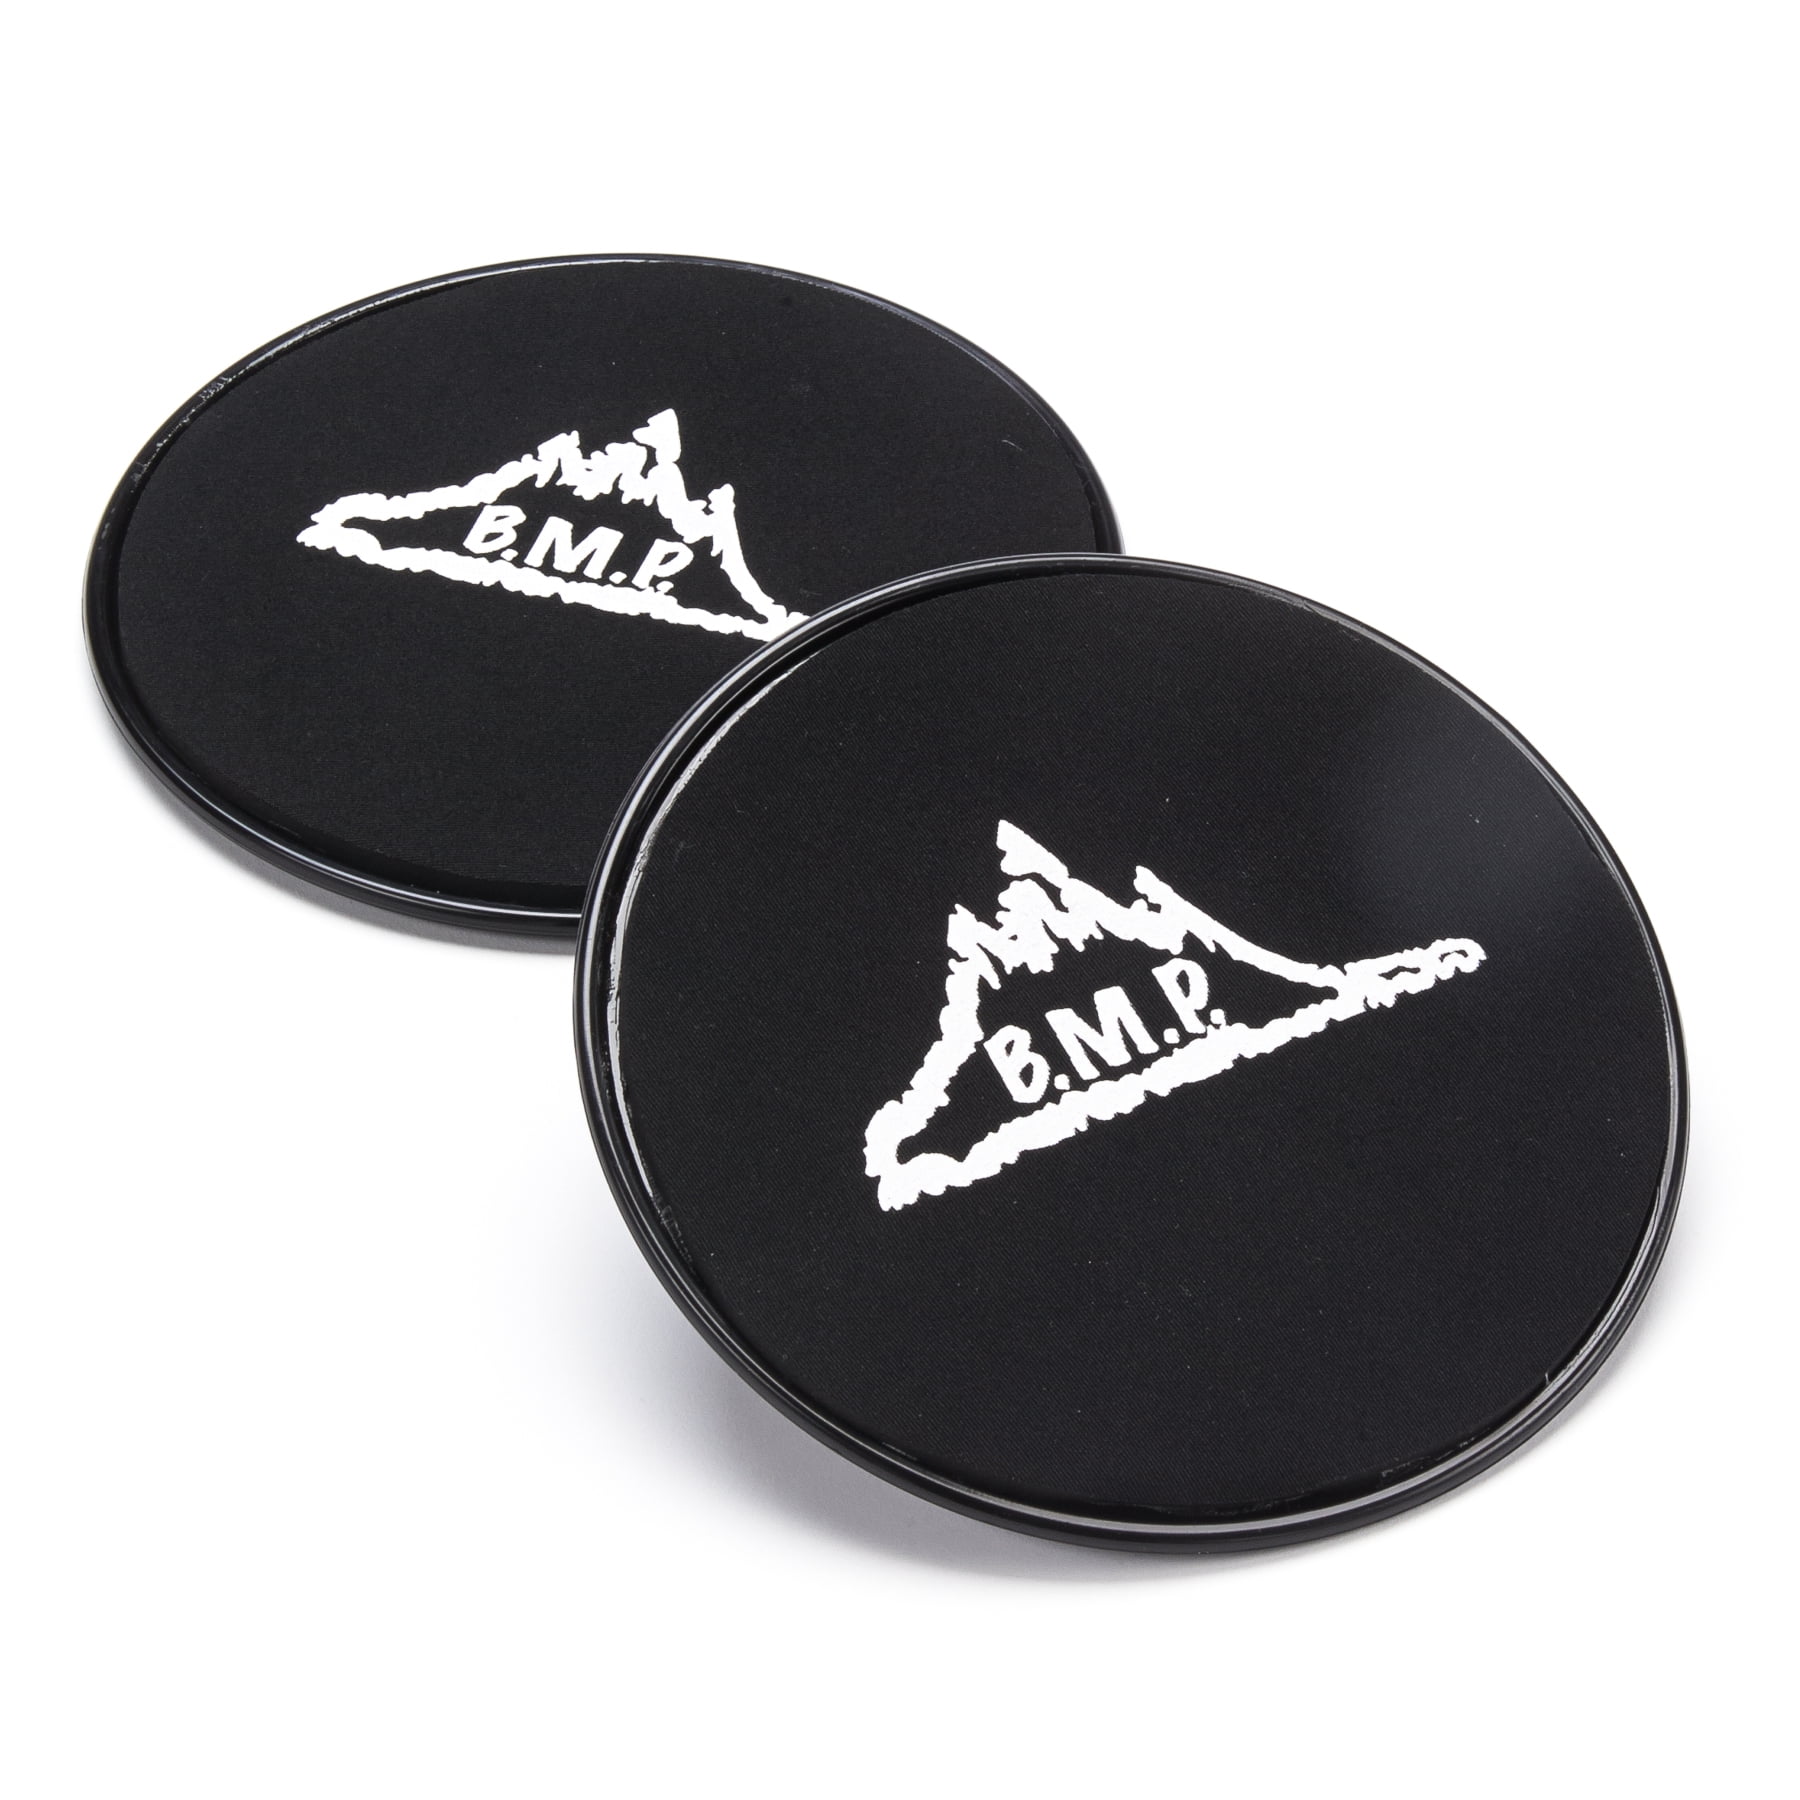 Picture of Black Mountain Products Sliders Black Black Core Exercise Sliders with Gliding Discs - Set of 2